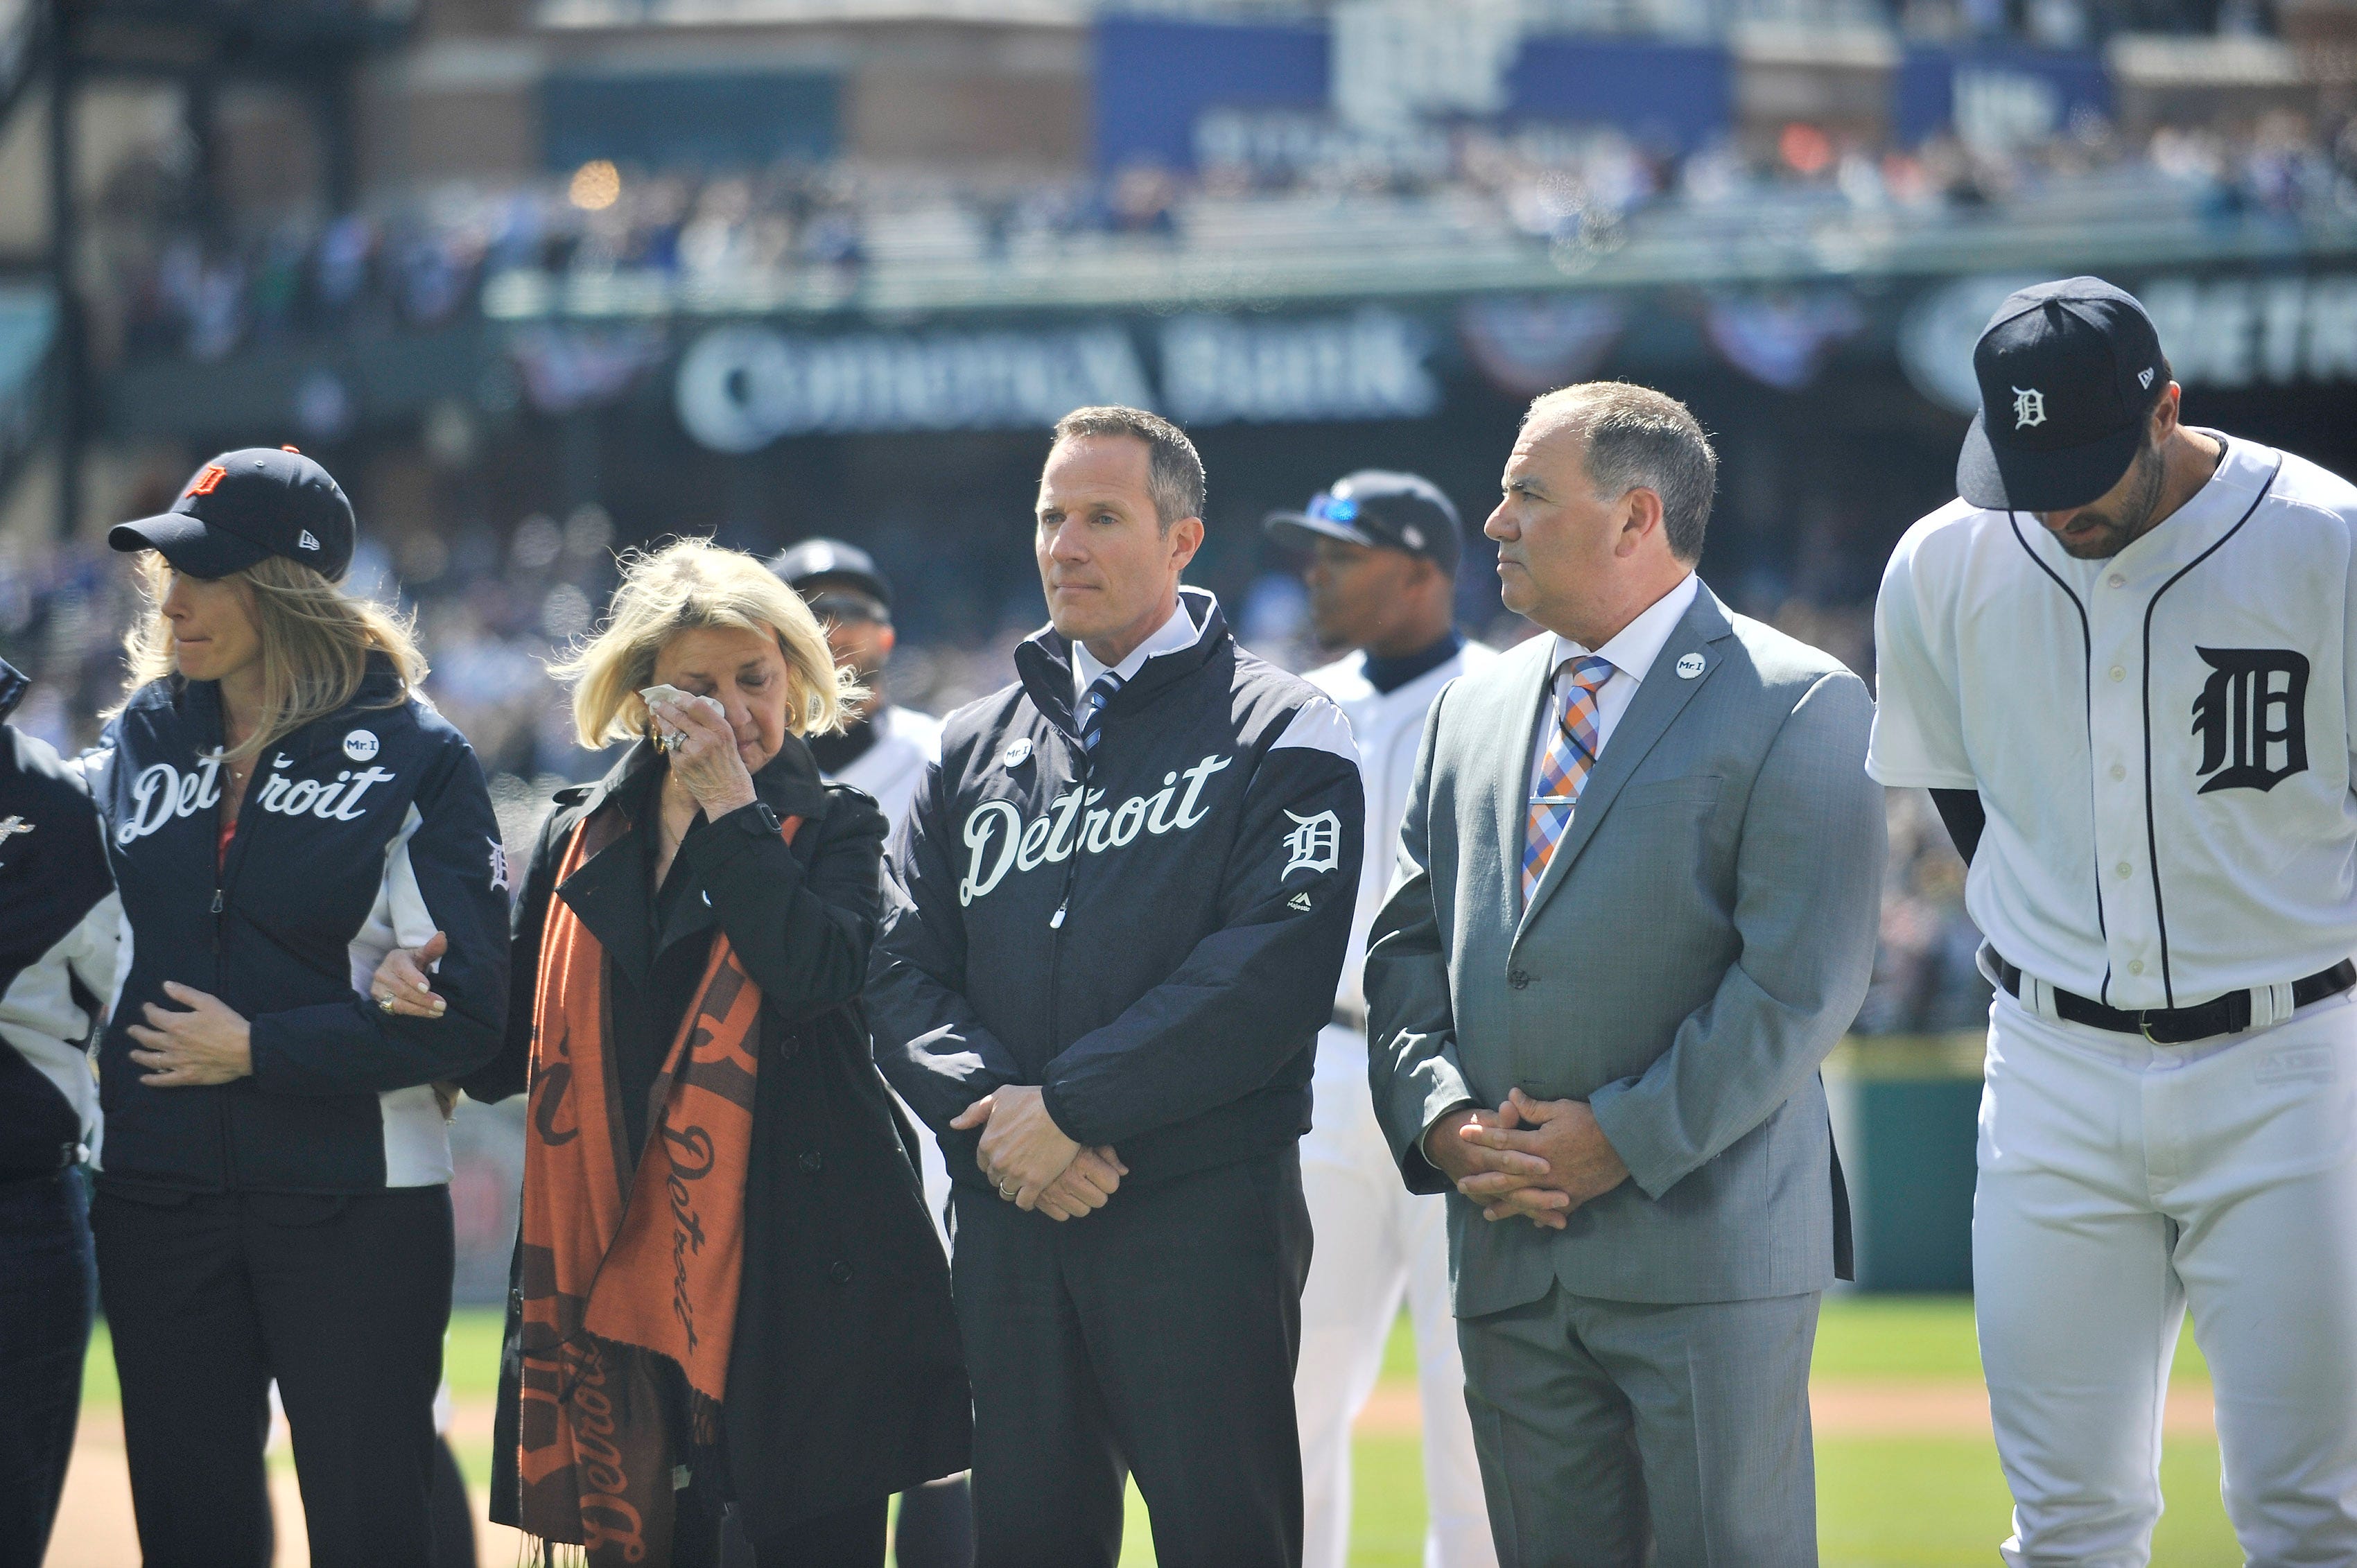 Marian Ilitch wipes away a tear standing with her son, Chris Ilitch, next to Al Avila, right, Tigers executive vice president of baseball operations and general manager after a moment of silence during the tribute to Michael Ilitch before the game. Detroit Tigers vs Boston Red Sox at Tigers Opening Day at Comerica Park in Detroit on April 7, 2017.